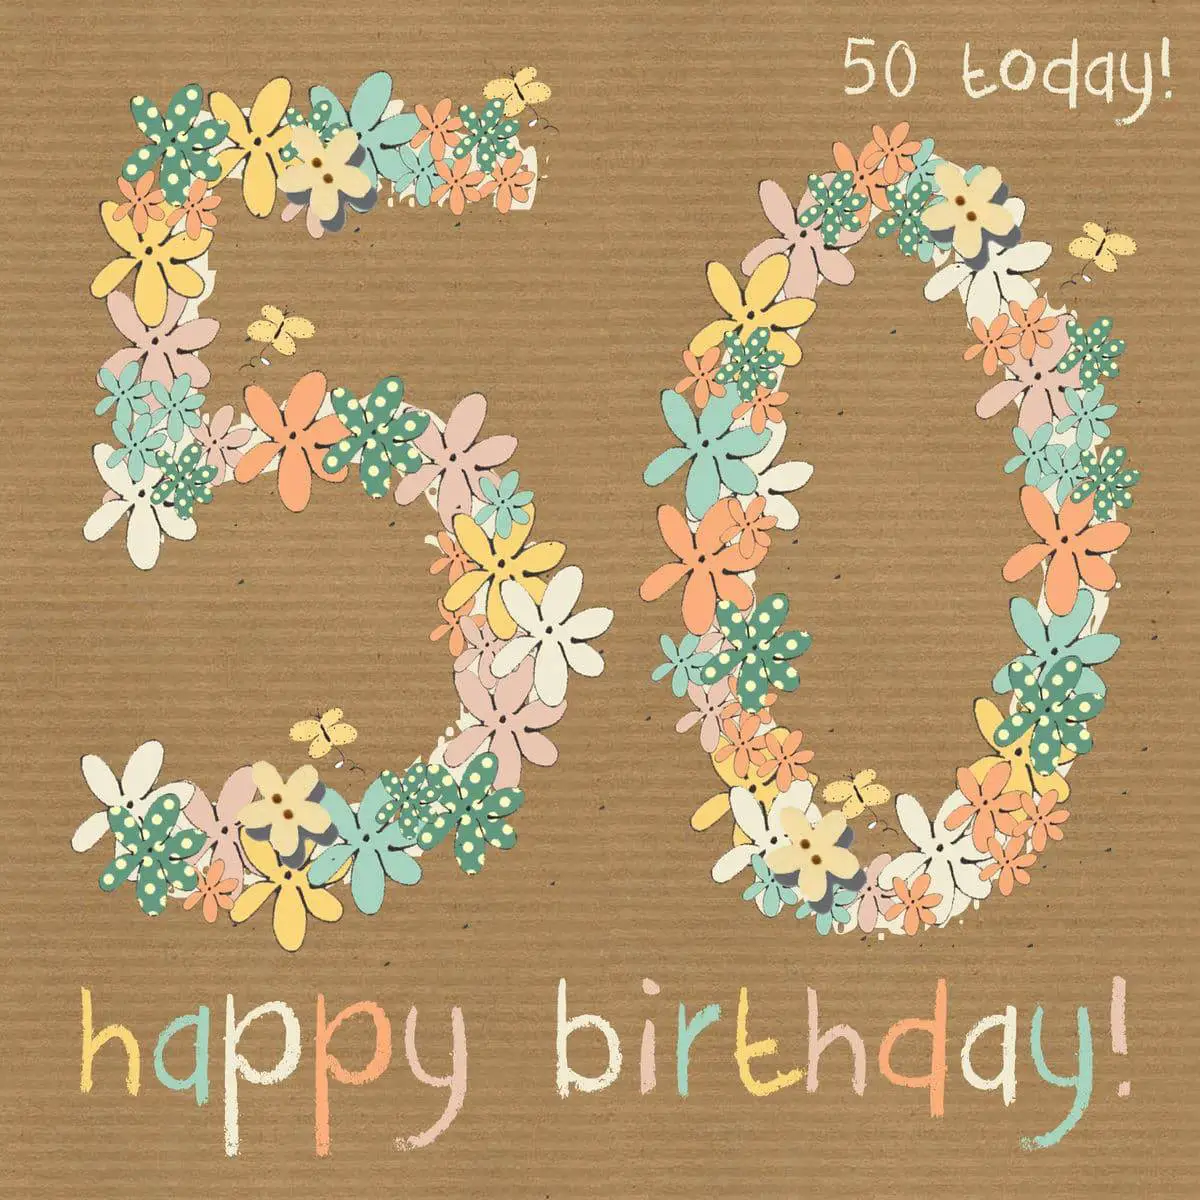 Banner for 50th birthday party themes featuring flowers